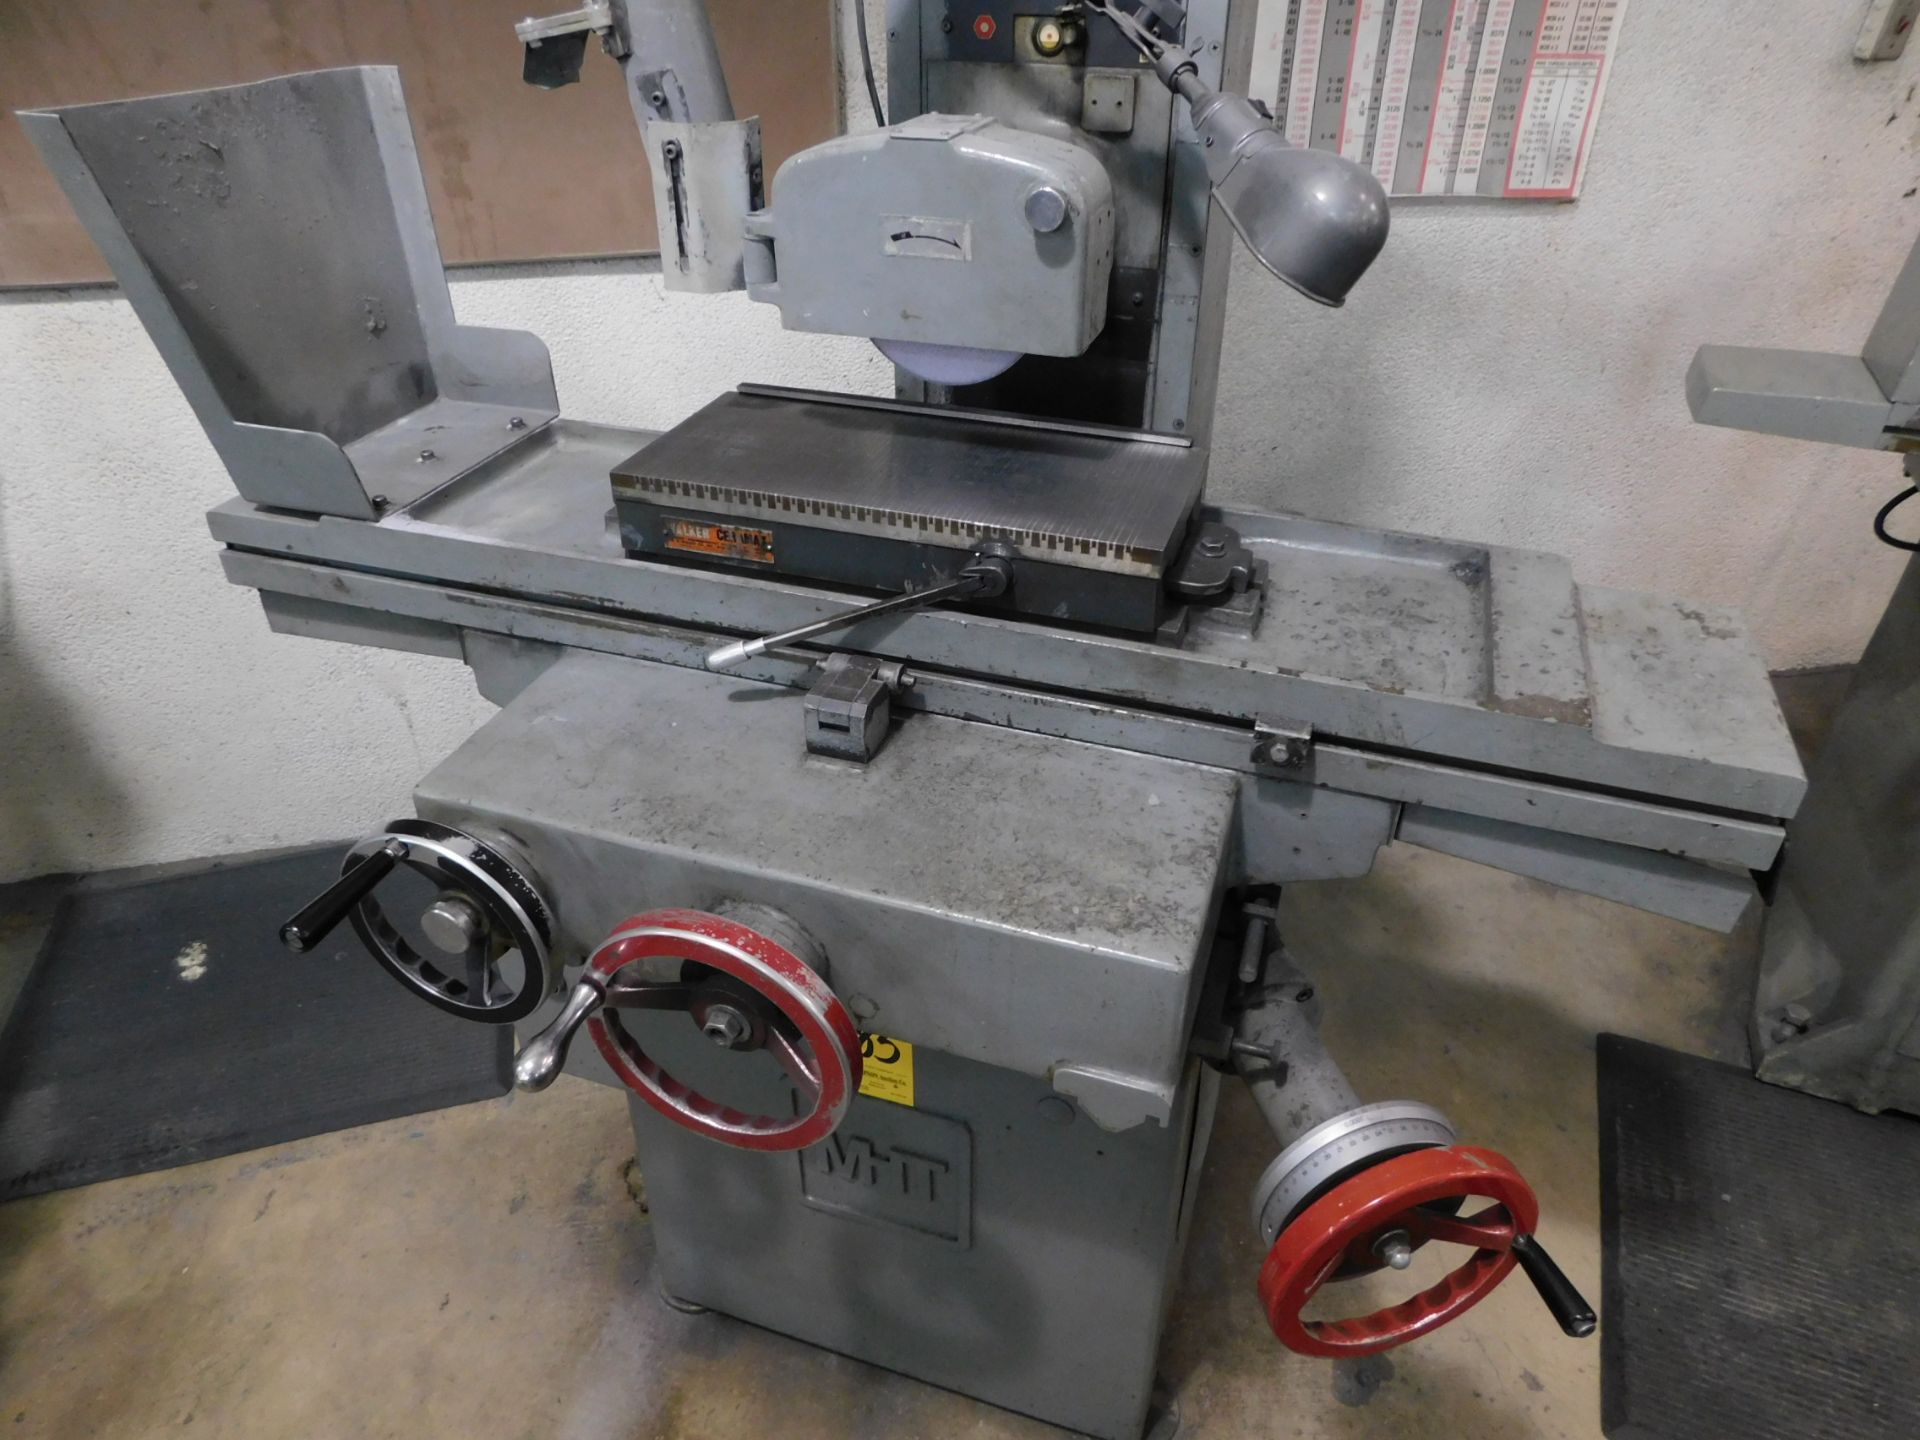 Mitsui Model 2-50MH 8" x 18" Hand-Feed Surface Grinder, SN 84124675, Walker Ceramax 8' x 18" - Image 2 of 10